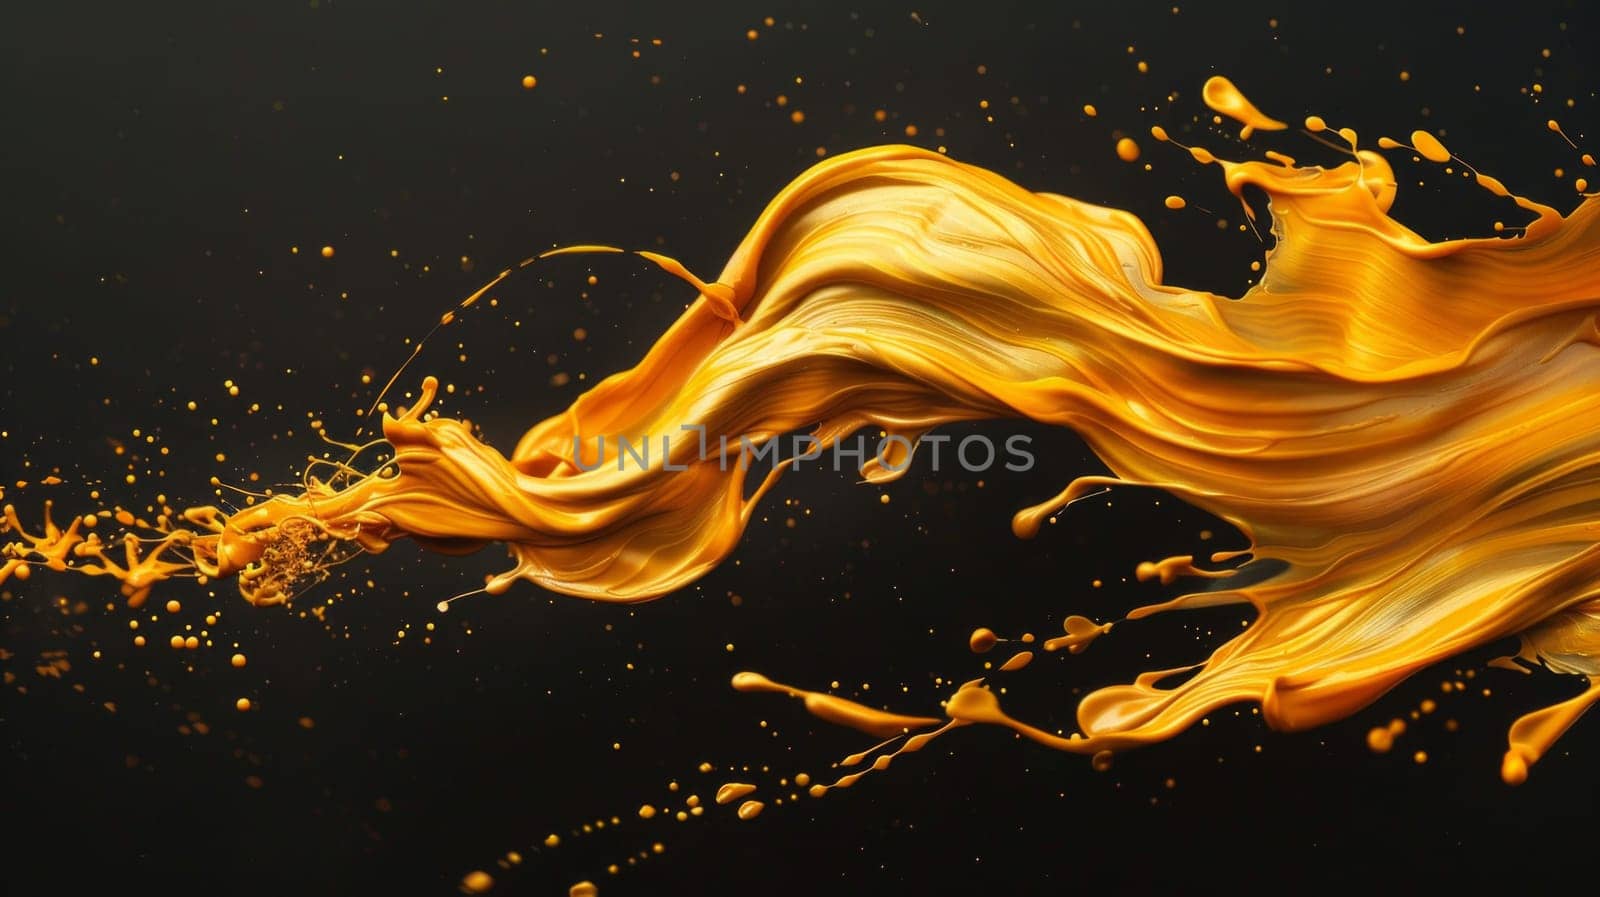 A vibrant yellow liquid dances and splashes against a pitch-black background, creating a mesmerizing contrast of colors by but_photo